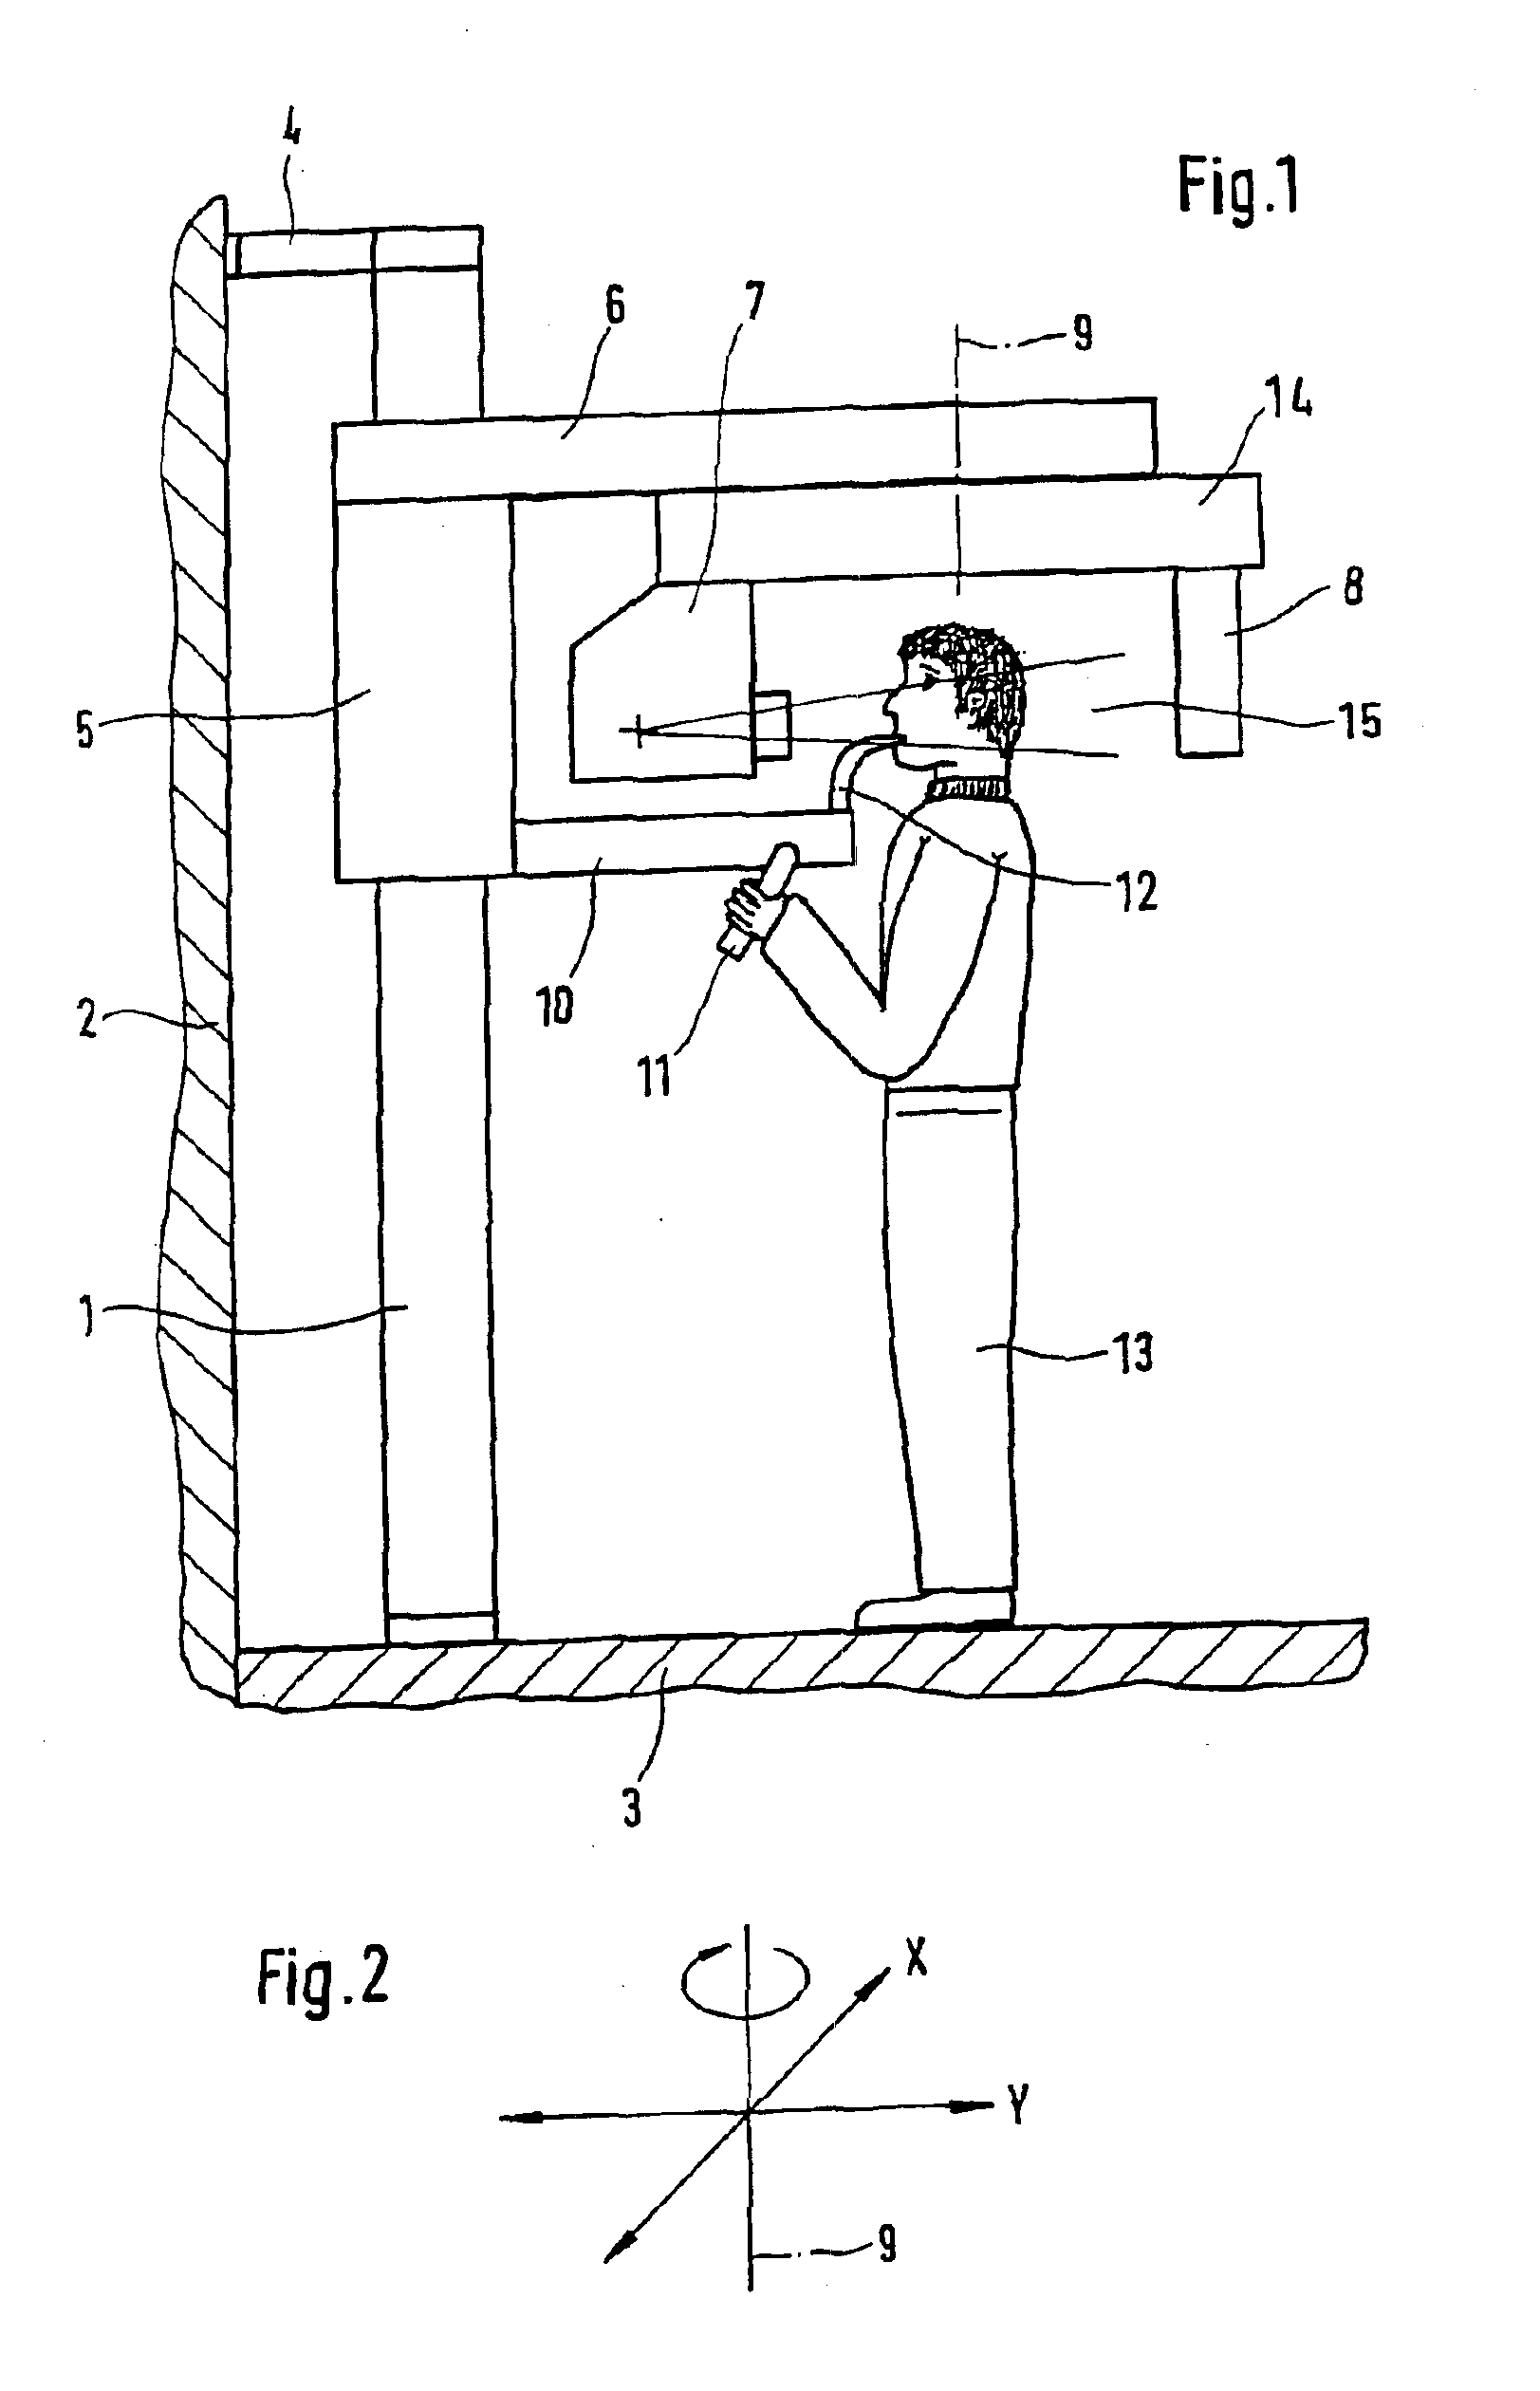 Dental X-ray device comprising a mobile support structure